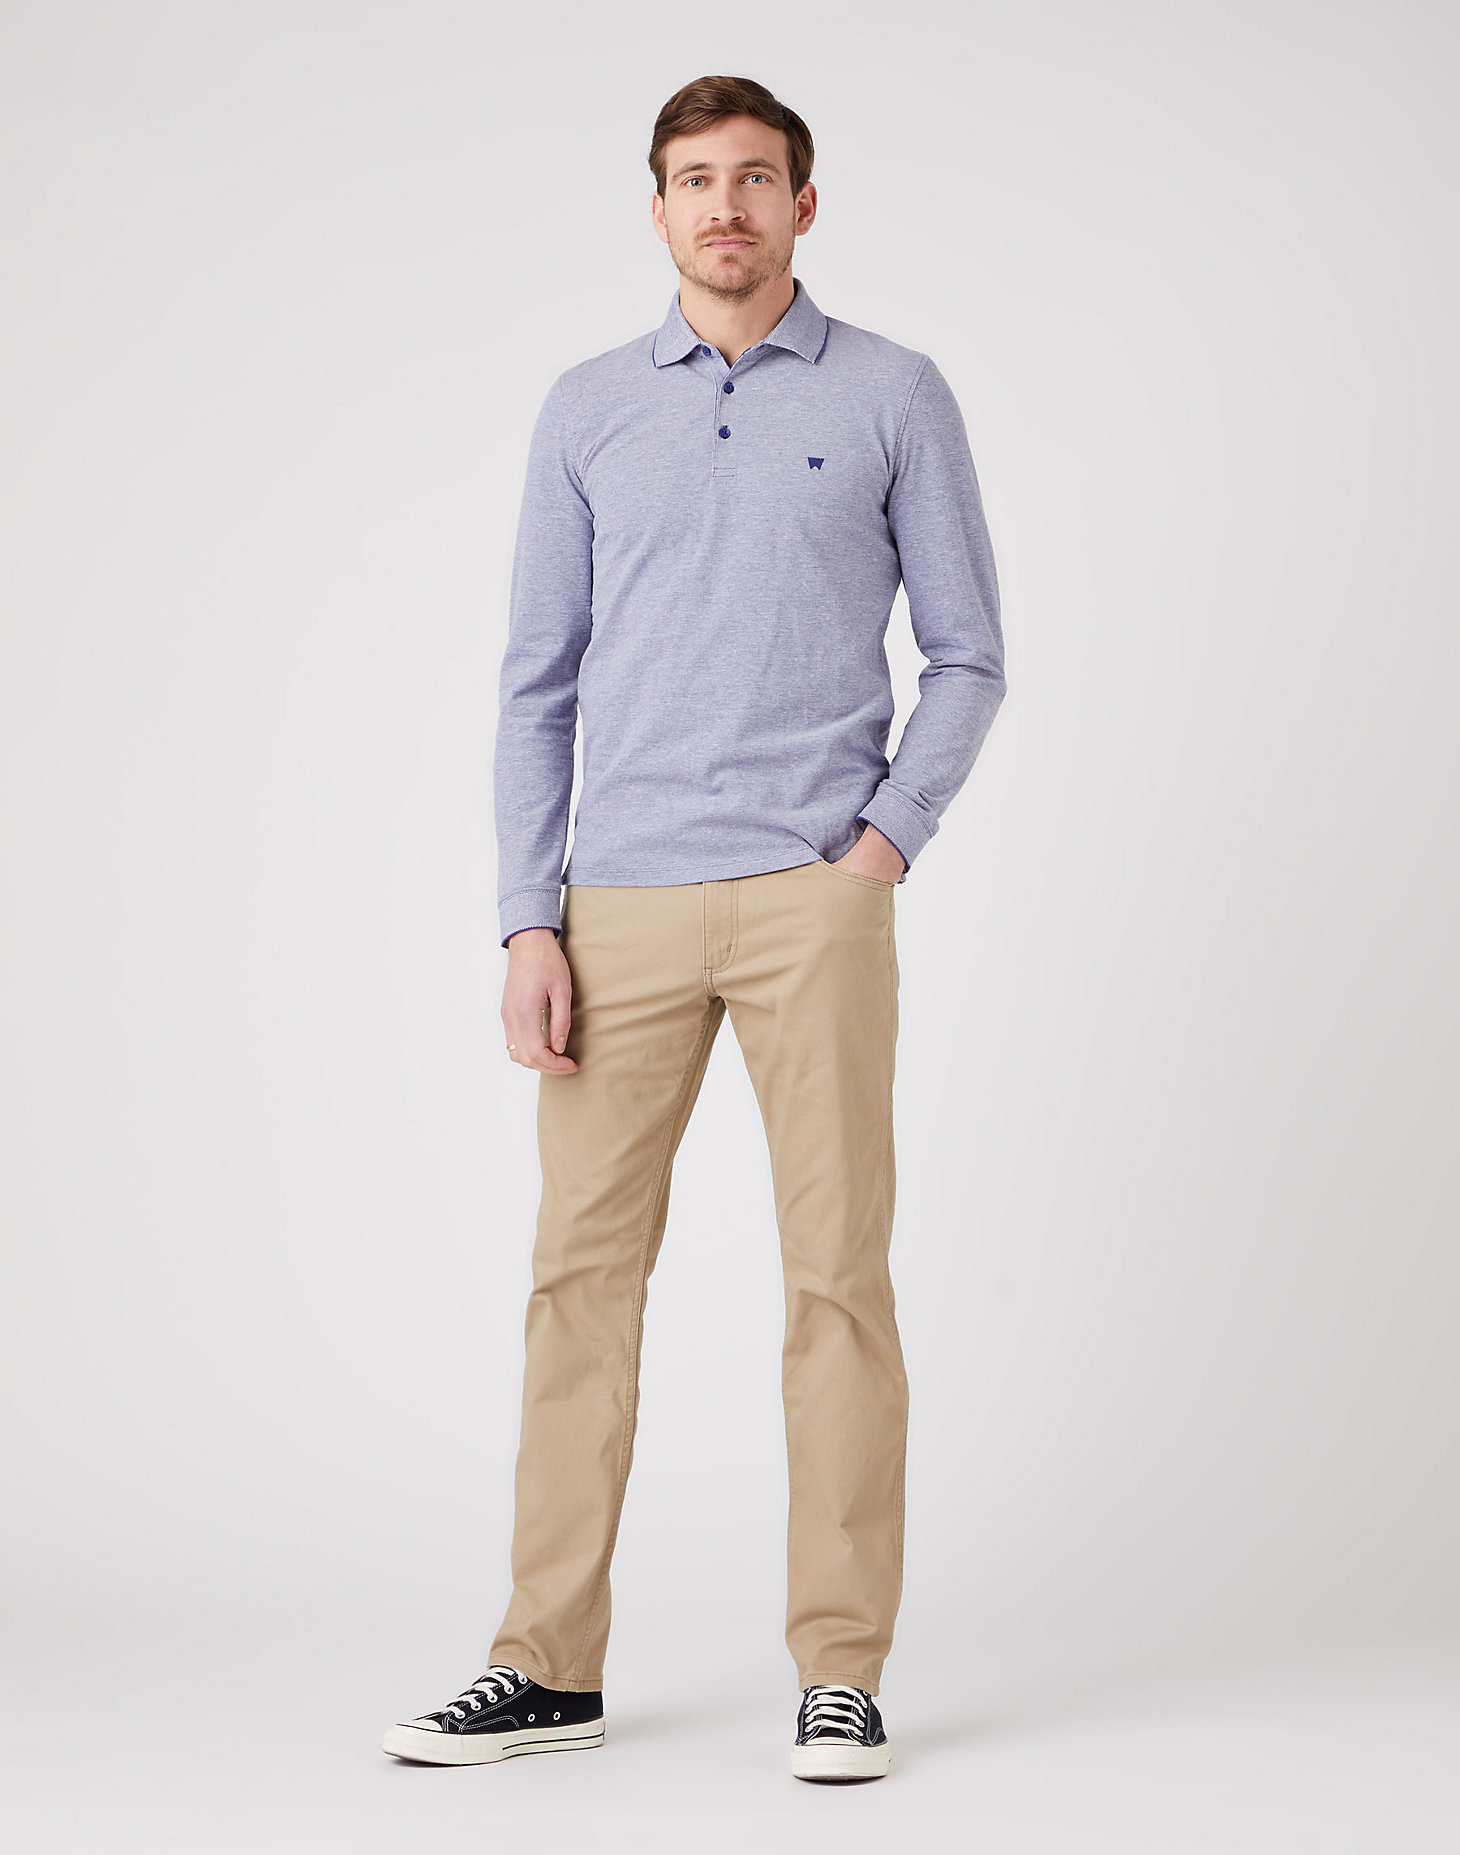 Long Sleeve Refined Polo in Blue Ribbon alternative view 1